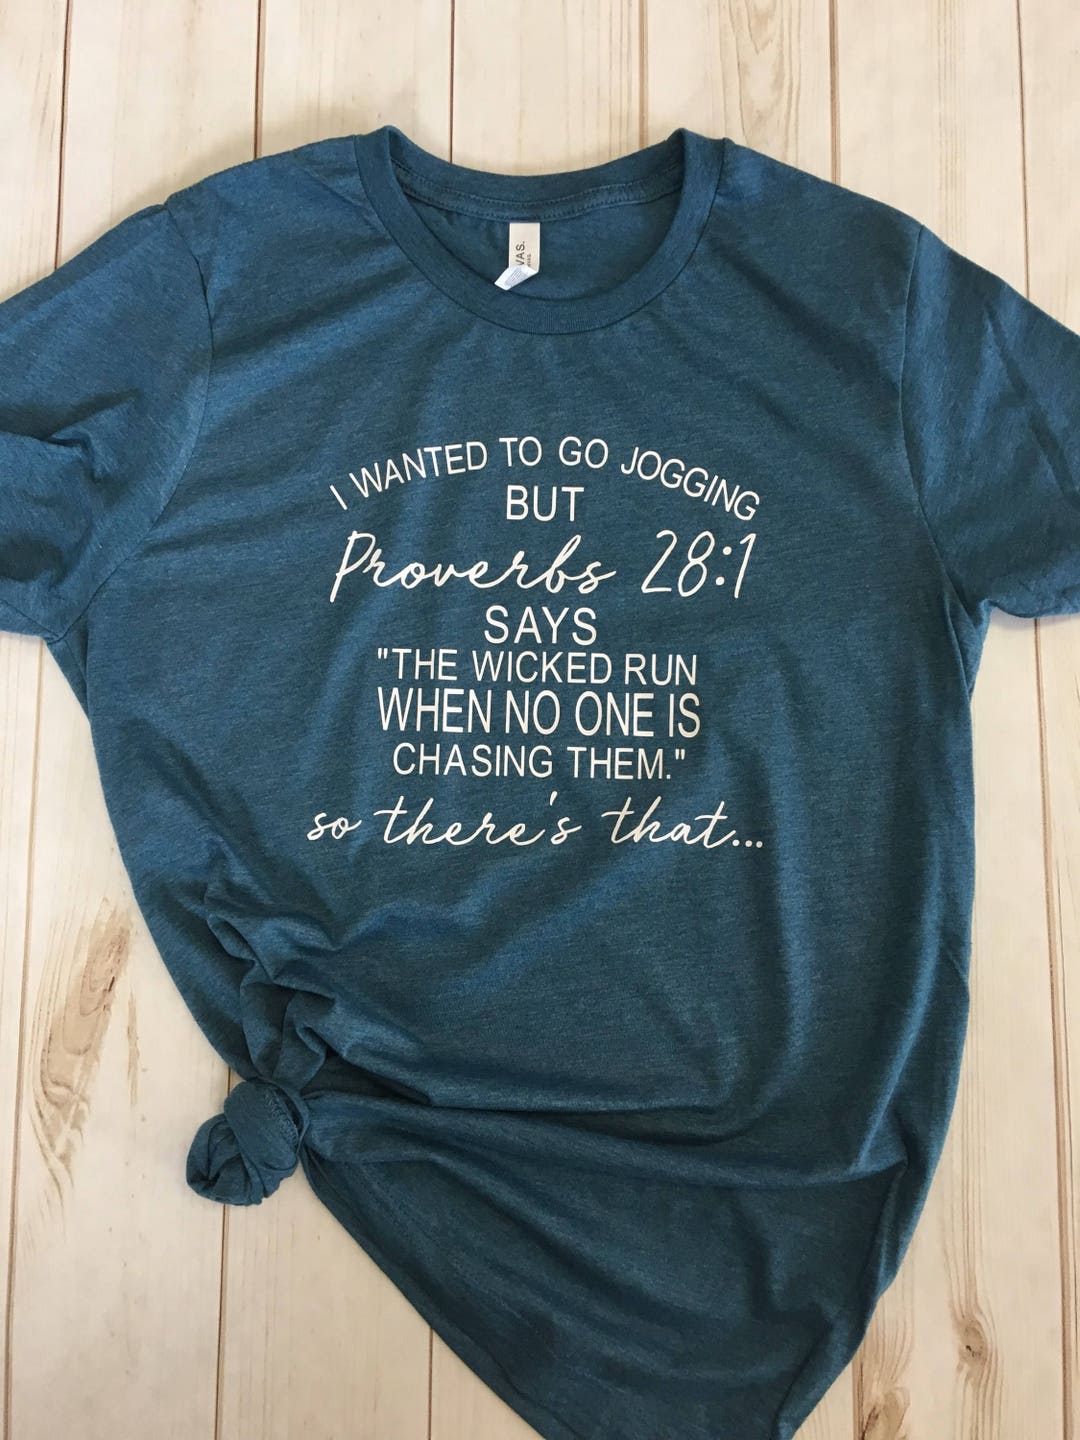 Proverbs Shirt I Wanted to Go Jogging but Proverbs 28:1 Says the Wicked ...